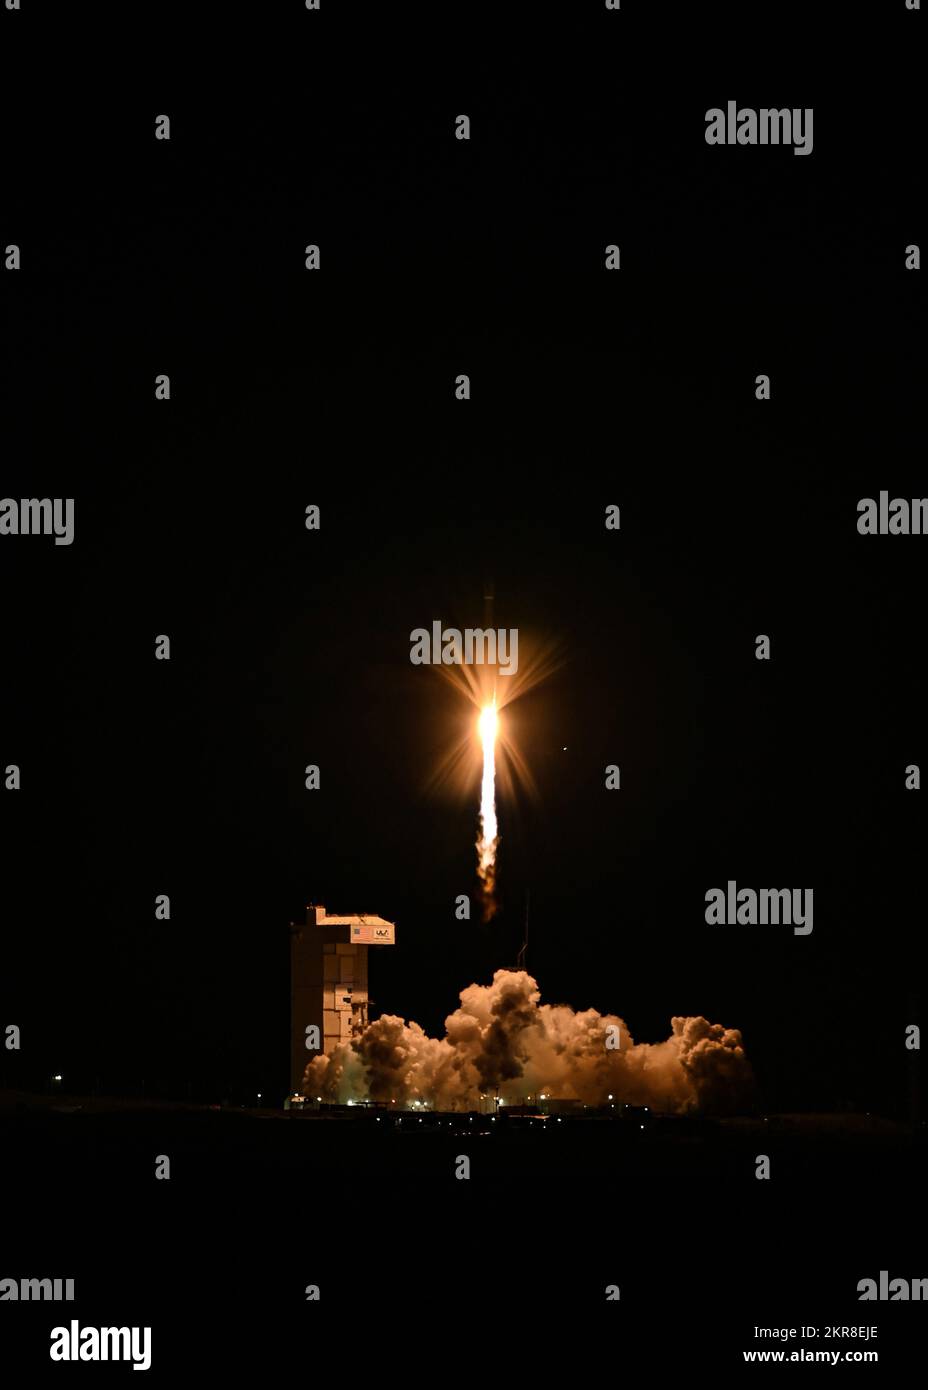 Team Vandenberg launched a United Launch Alliance Atlas V rocket carrying the National Oceanic and Atmospheric Administration's (NOAA) Joint Polar Satellite System-2 (JPSS-2) and NASA's Low-Earth Orbit Flight Test of an Inflatable Decelerator (LOFTID) from Space Launch Complex-3 Thursday, Nov. 10, at 1:49 a.m. Pacific Time. Stock Photo